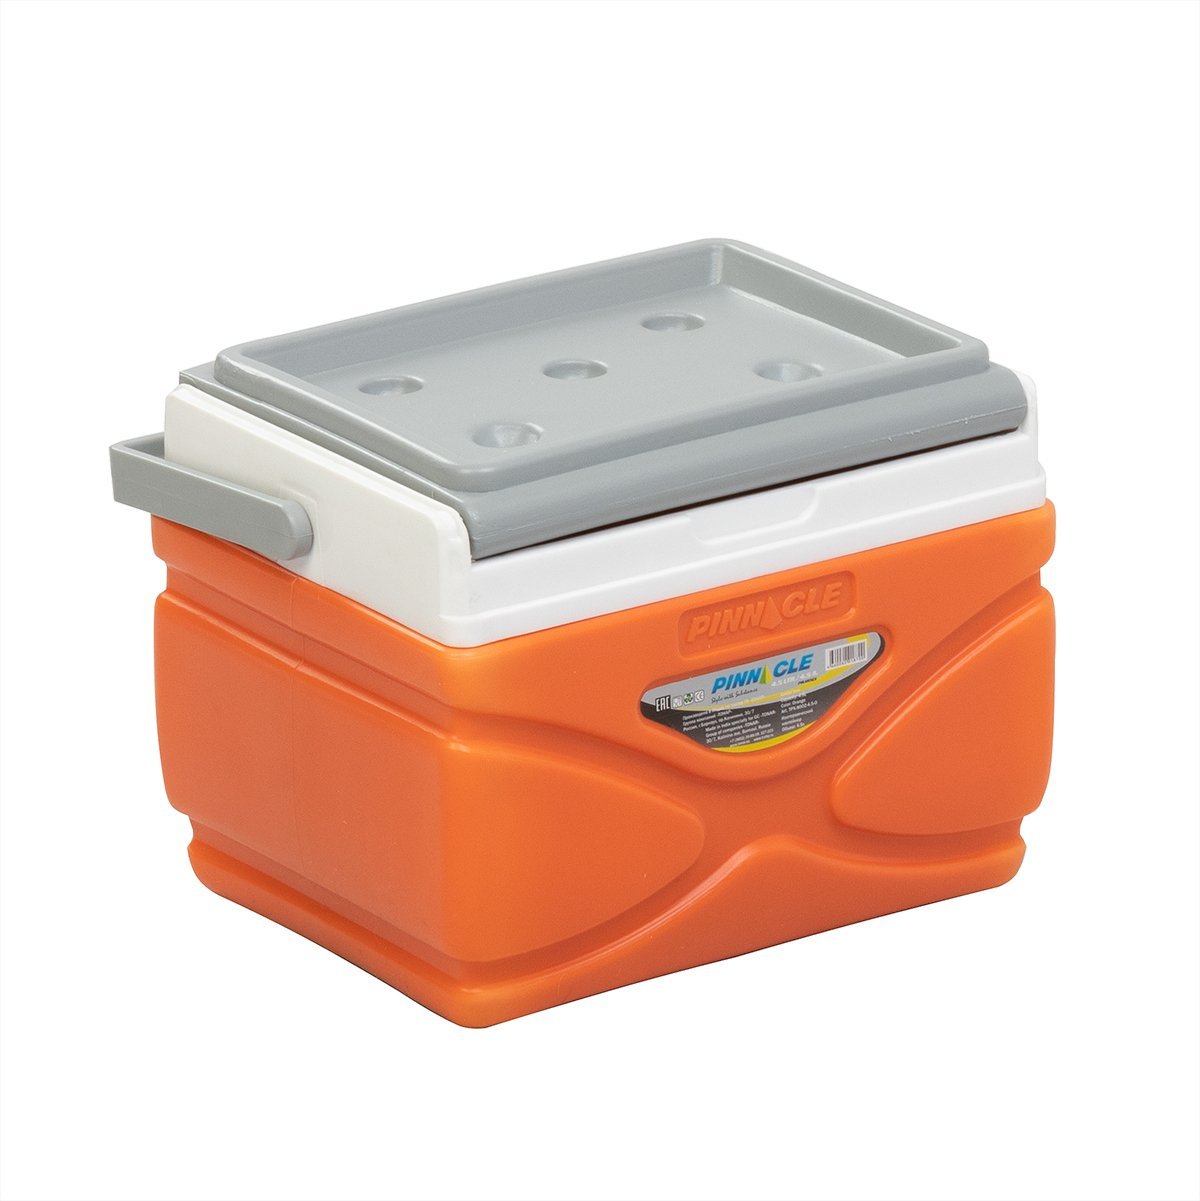 Prudence Portable Hard-Sided Ice Chest for Camping, 4 qt, with handle, orange color with a lid closed